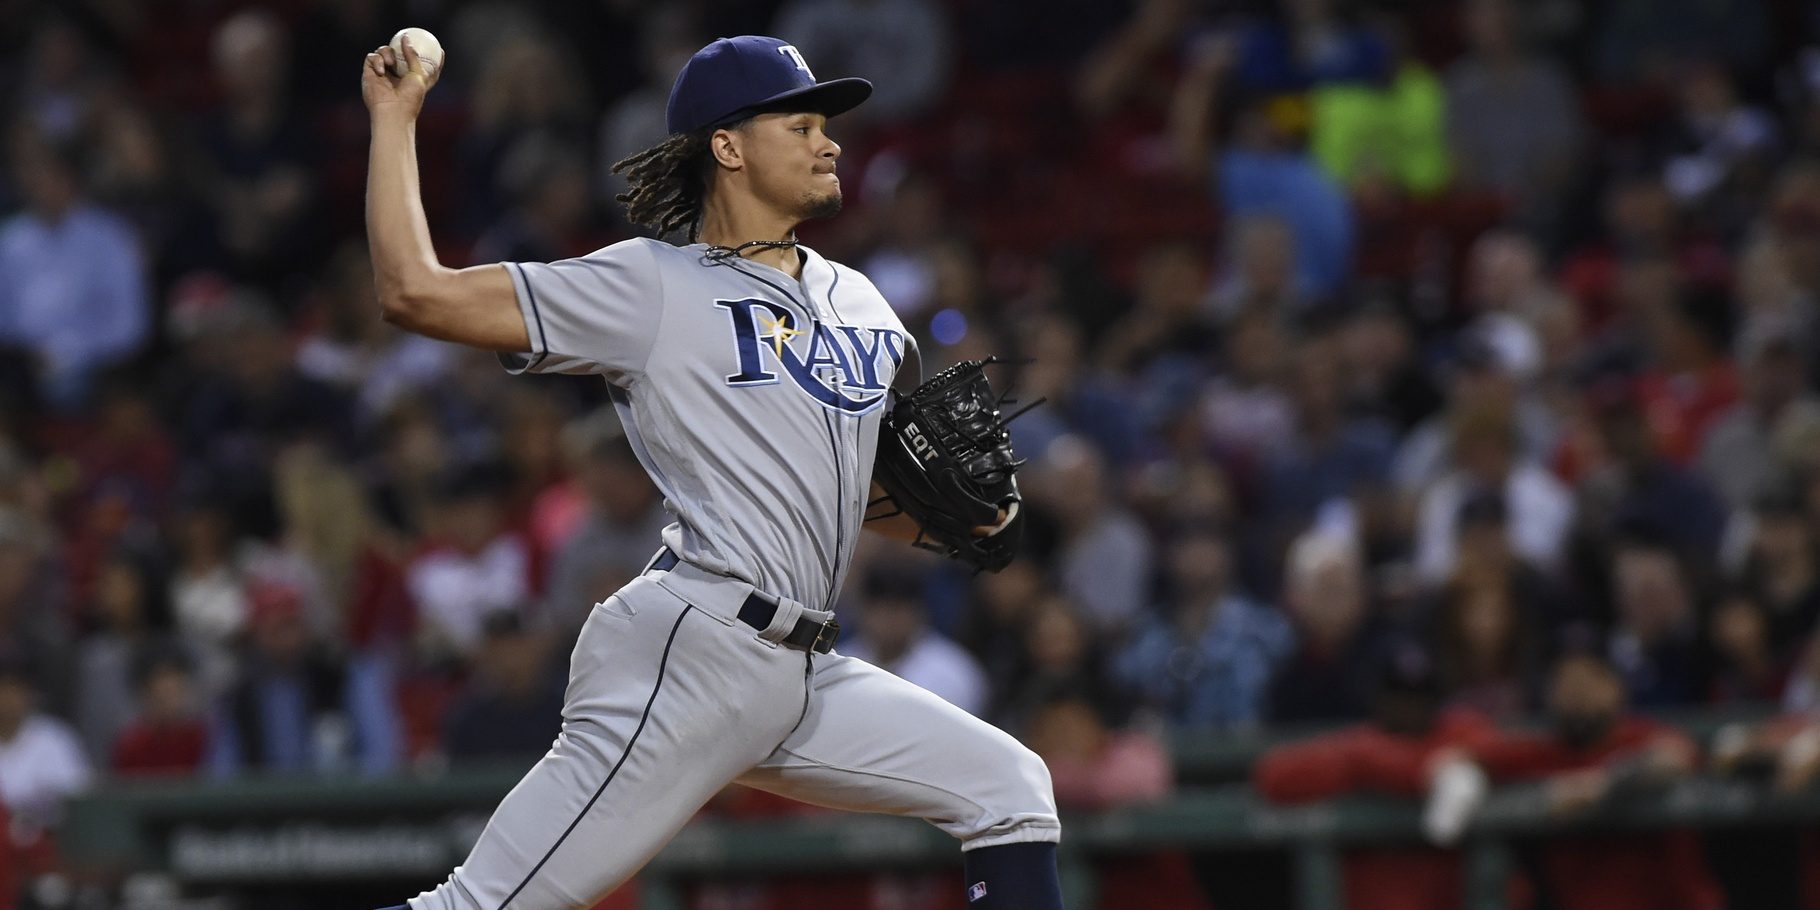 Tampa Bay Rays Drop Opener to Oakland A's - ESPN 98.1 FM - 850 AM WRUF